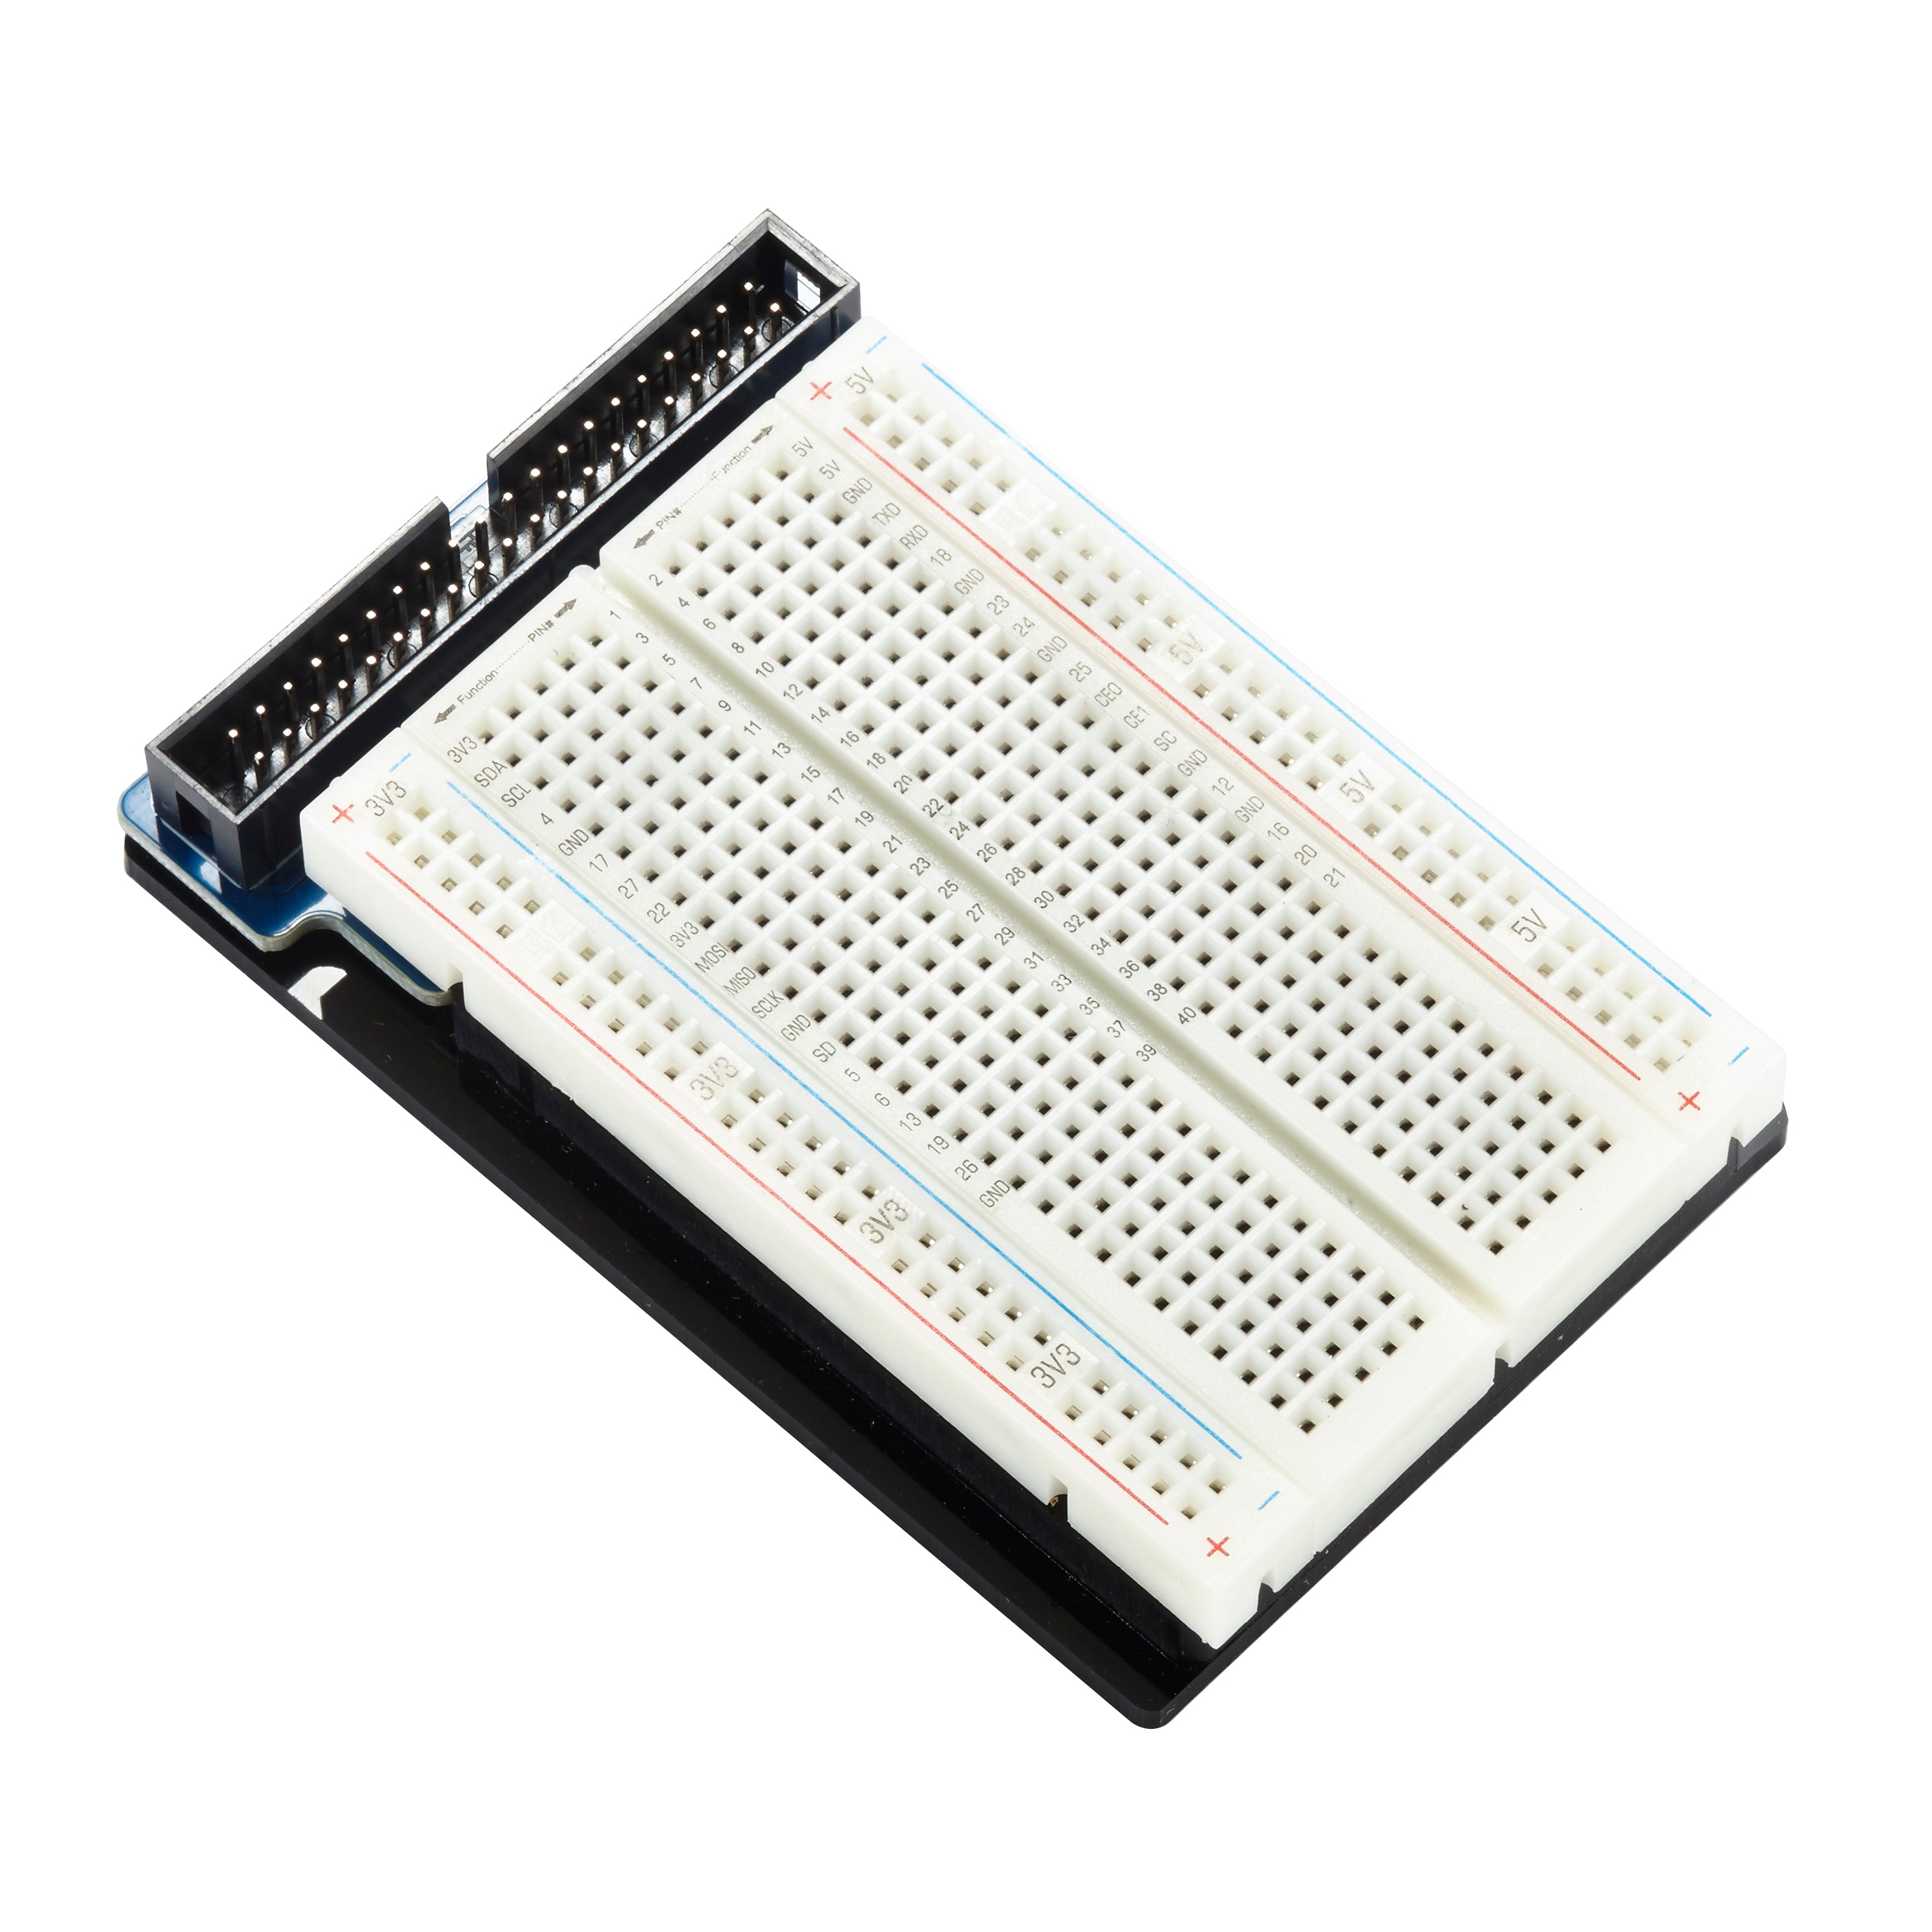 Adeept Raspberry Pi GPIO Breakout, T-Board with 830 Point Breadboard, 40  Pin Cable and 65 Jumper – Oz Robotics